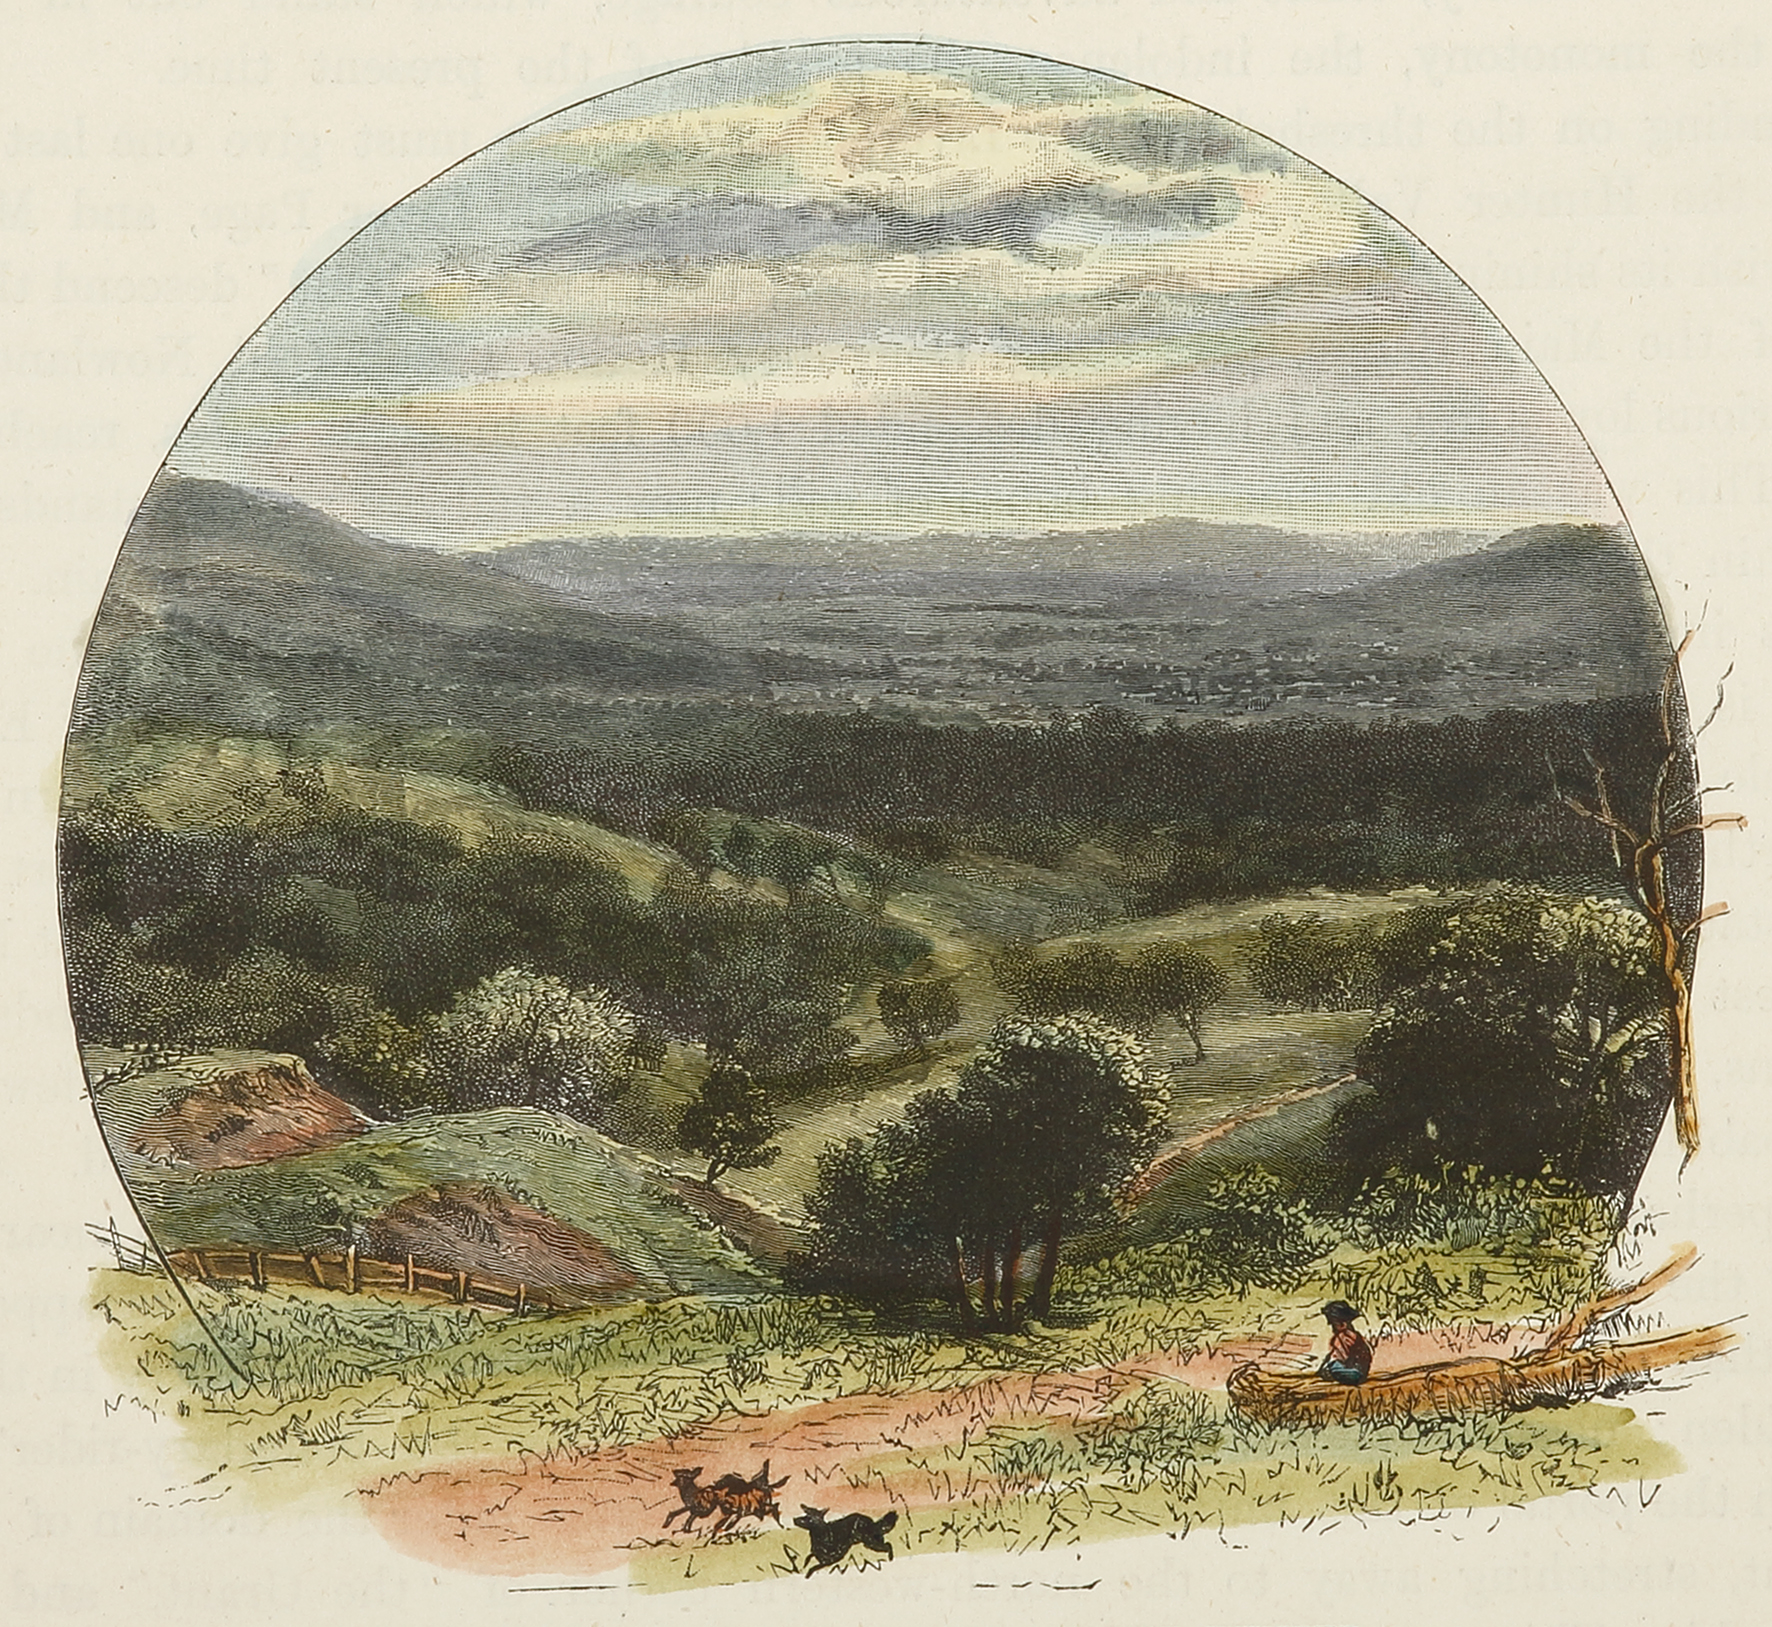 Murrurundi and the Valley of the Hunter. - Antique View from 1887